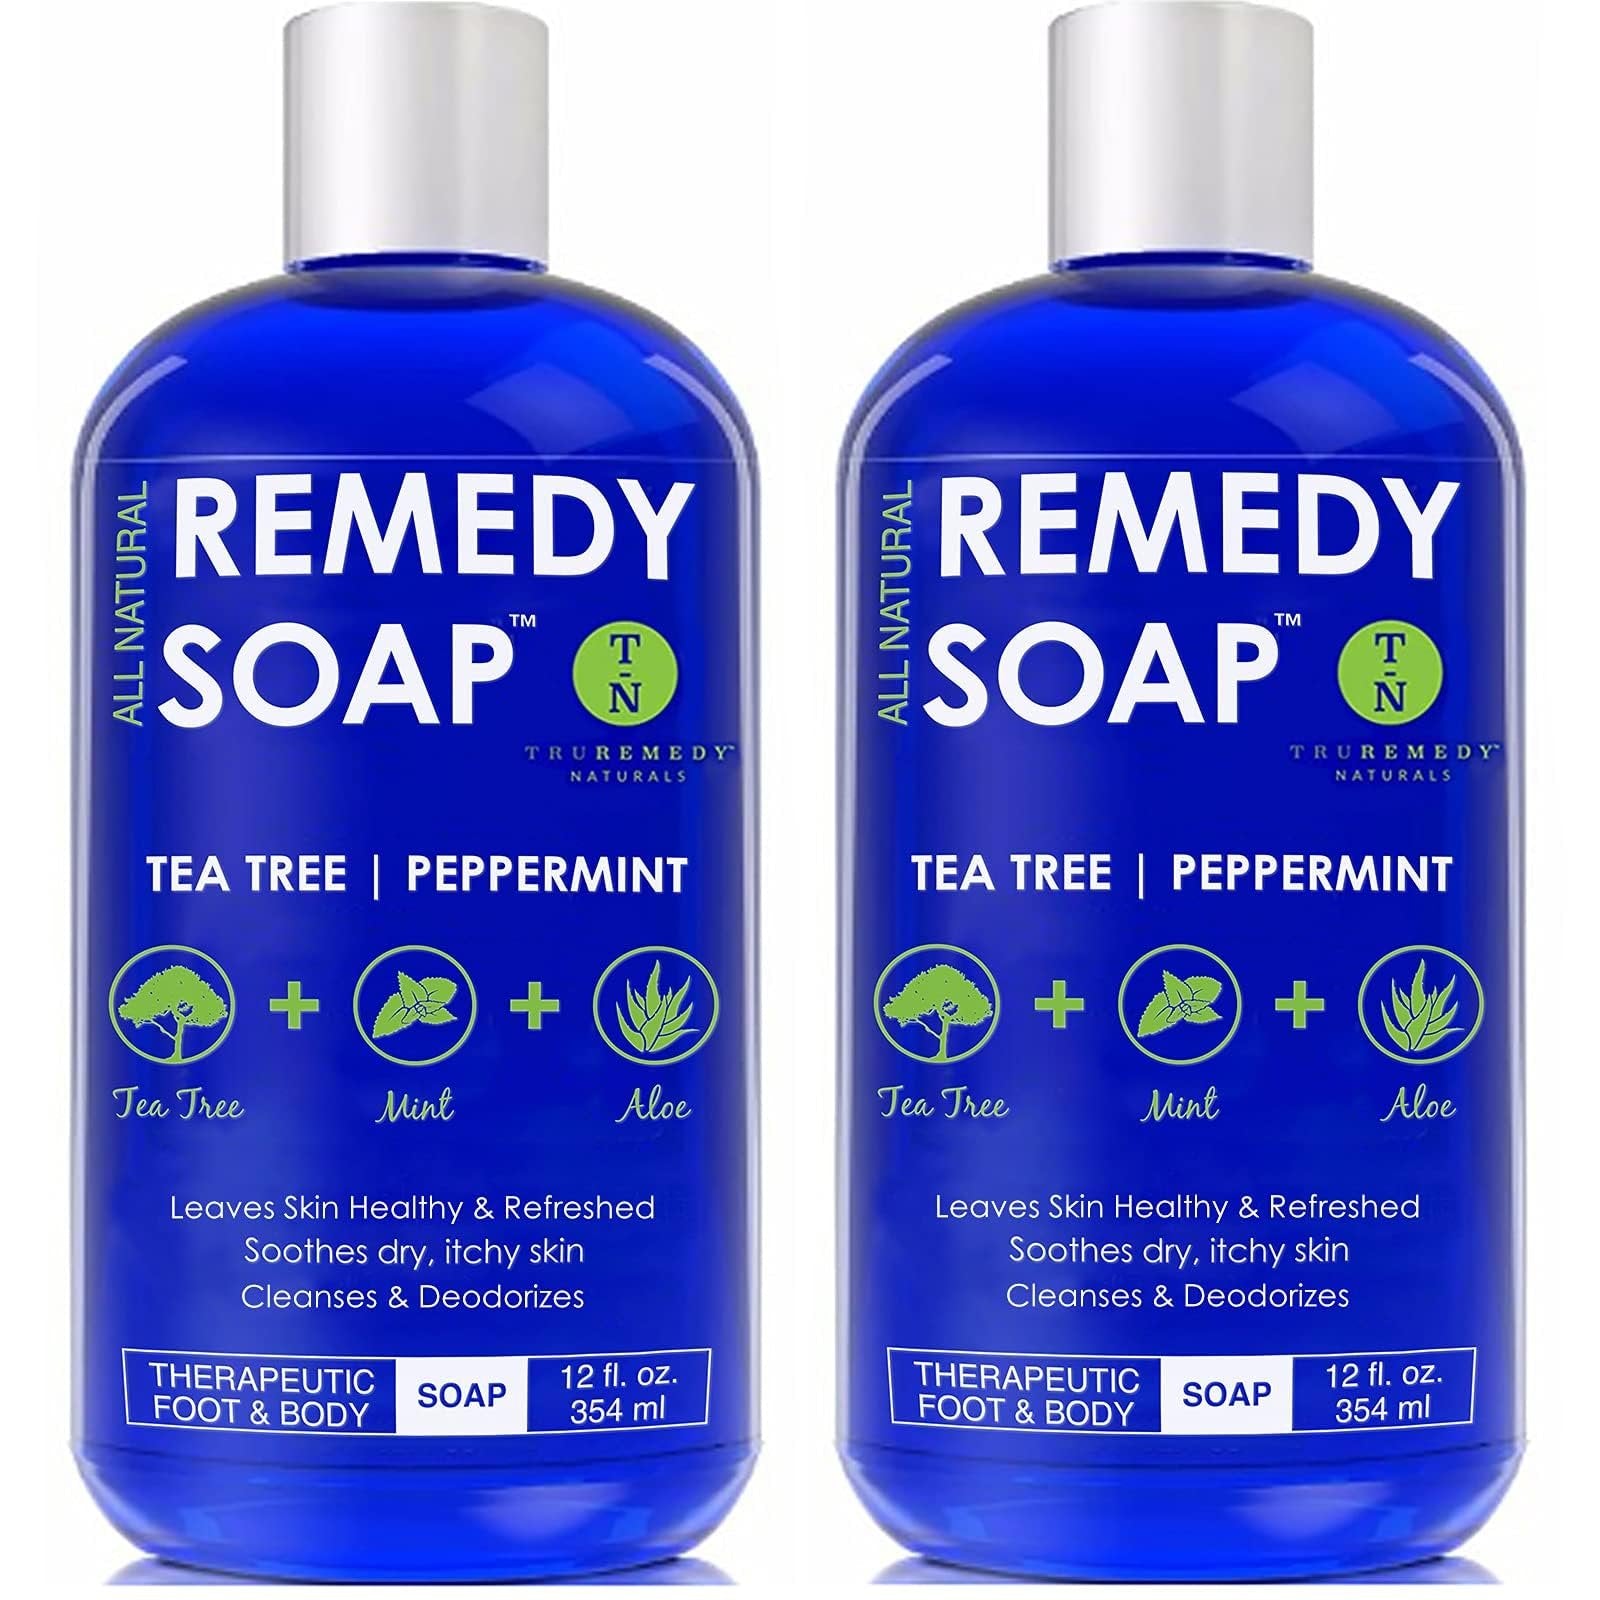 Remedy Soap Pack of 2, Helps Wash Away Body Odor, Sooth Athlete’s Foot, Ringworm, Jock Itch, Yeast Infections and Skin Irritations, 100% Natural with Tea Tree Oil, Mint & Aloe 12 oz